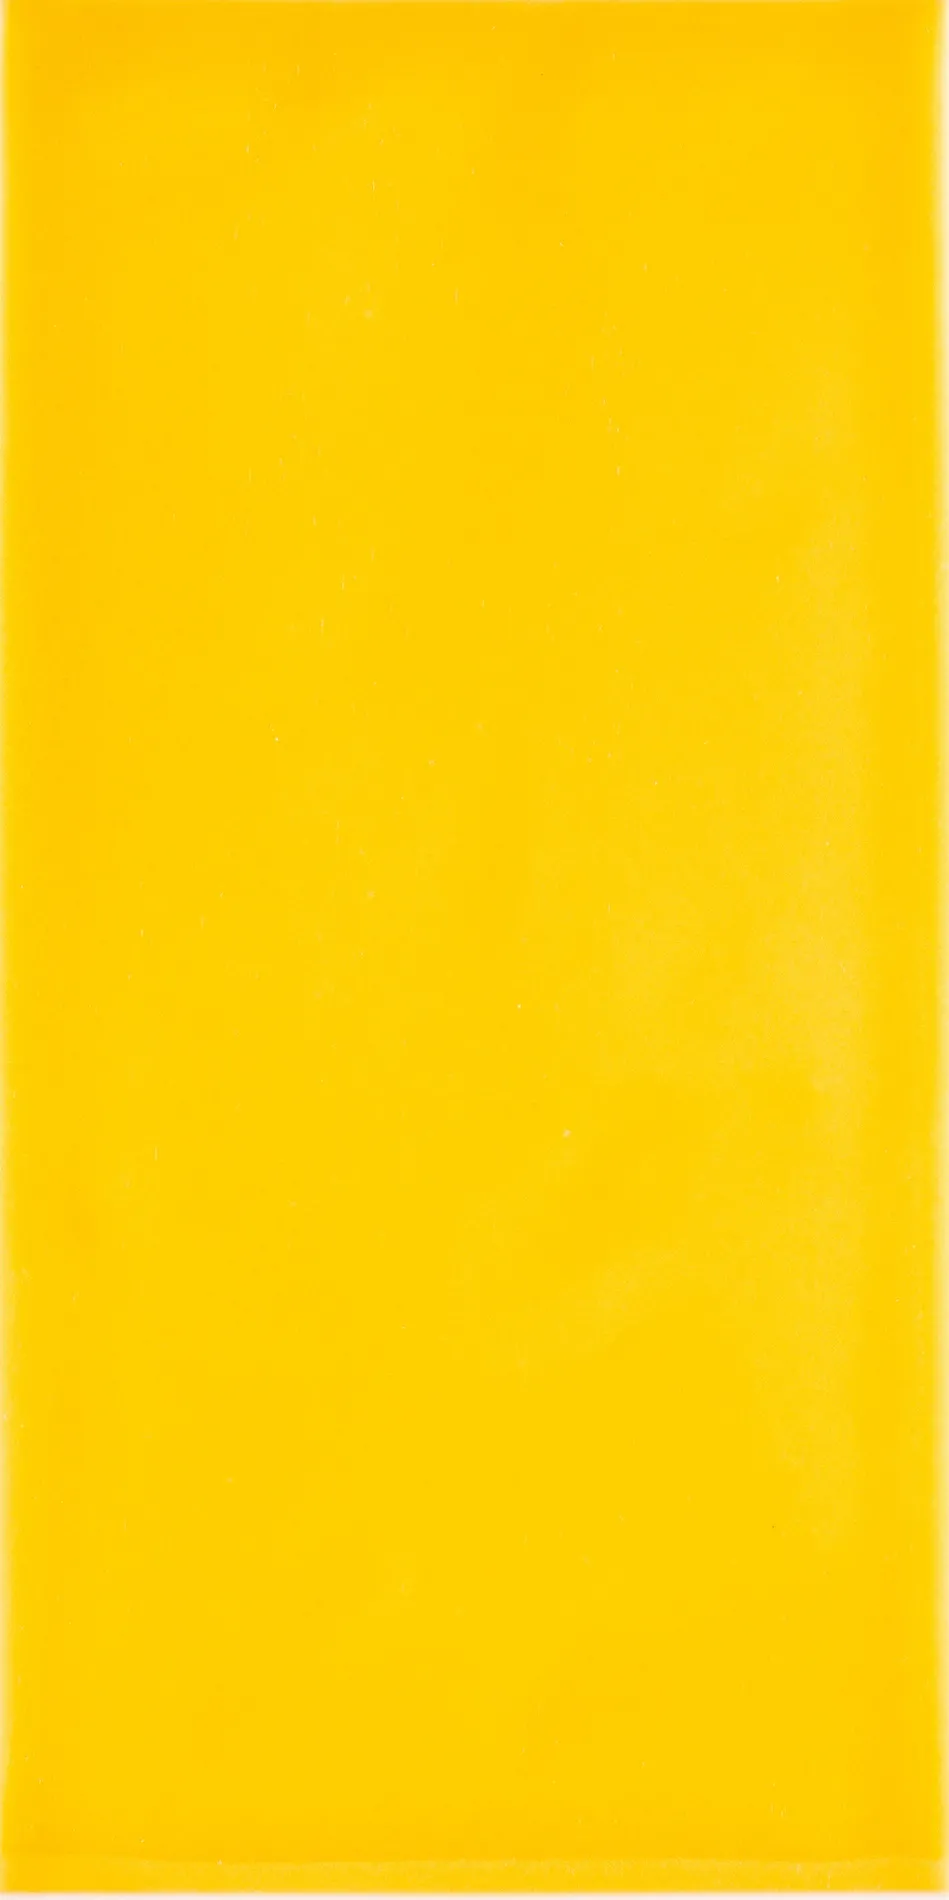 <h3>AMARELO</h3><small>Colections and Tiles, Aires Mateus</small>